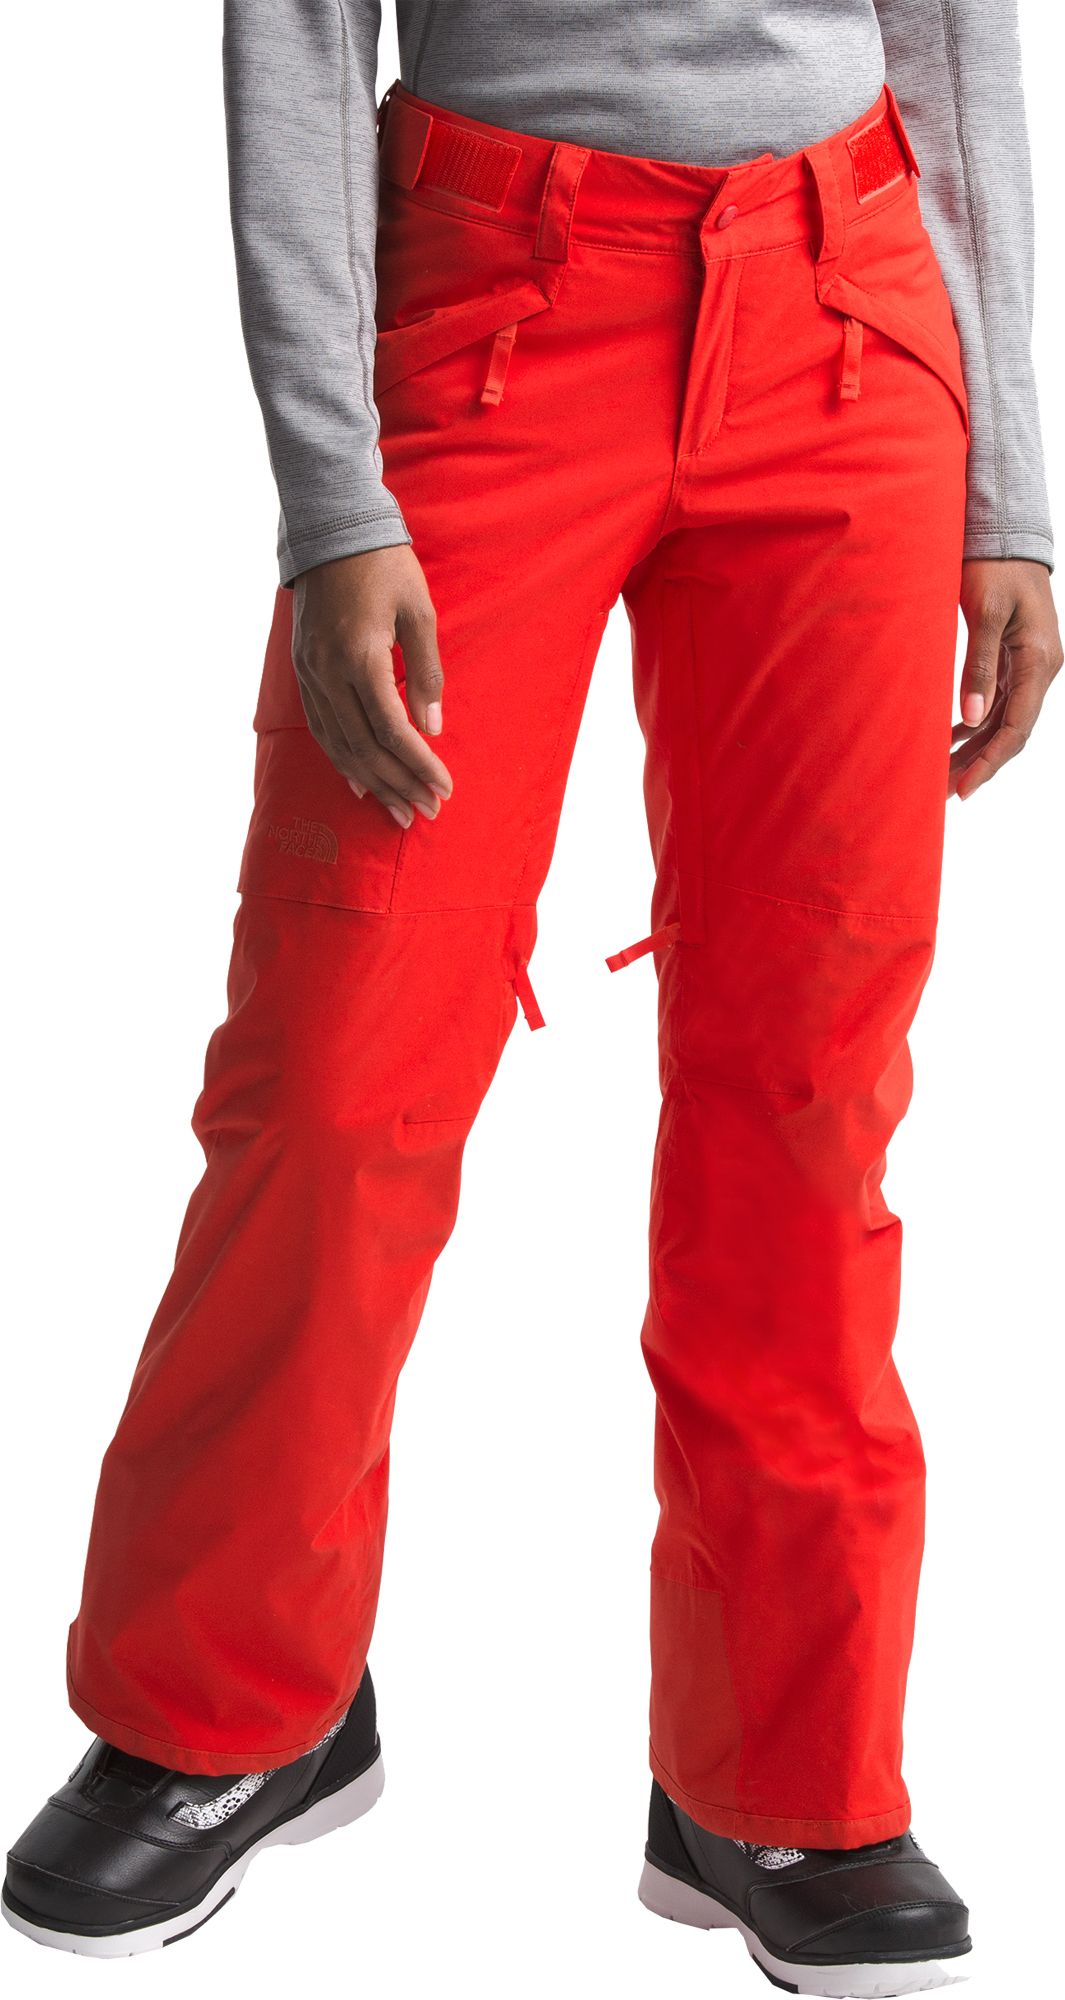 north face freedom insulated pants